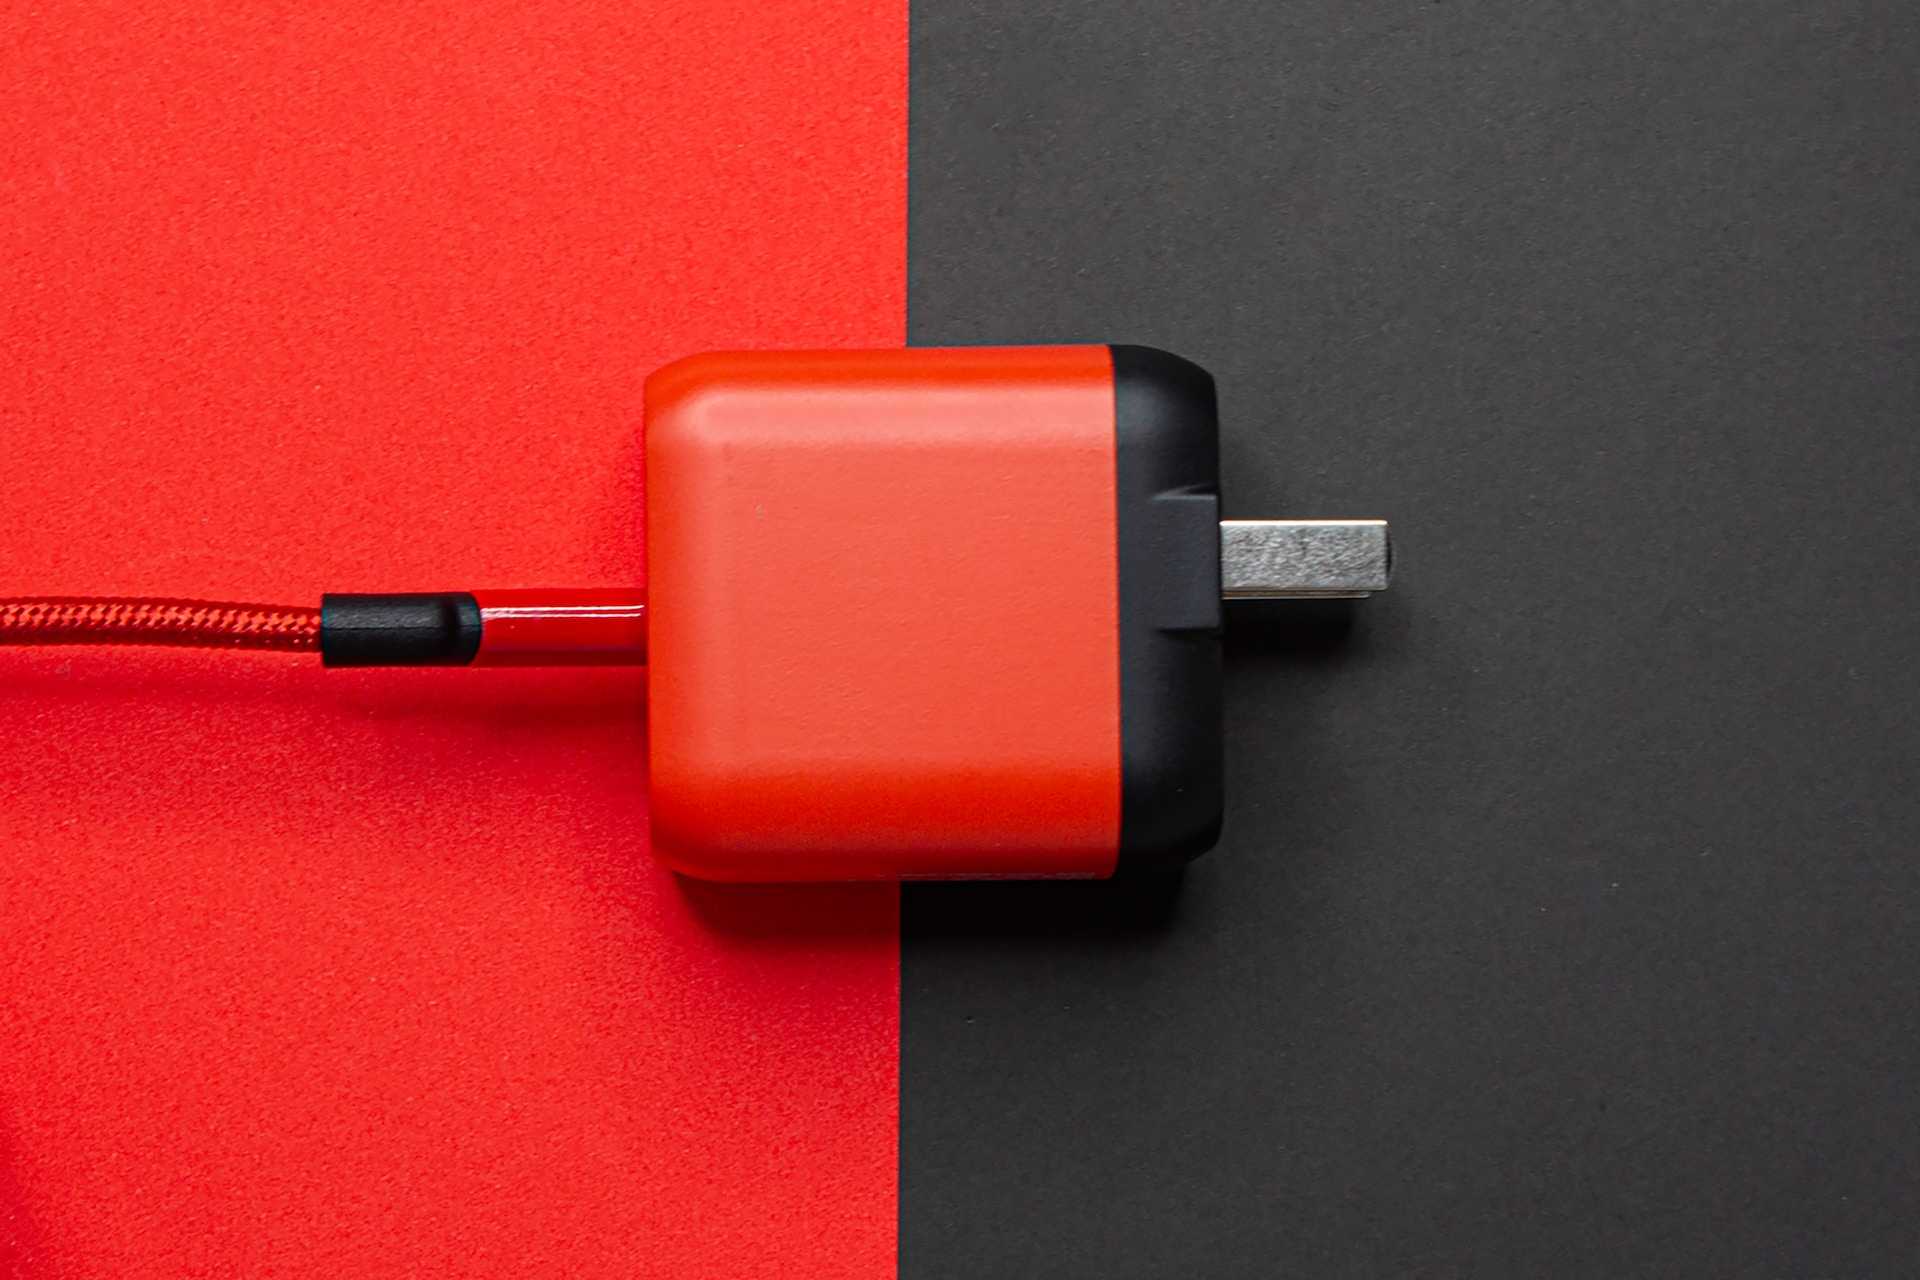 adapter on a red and black background